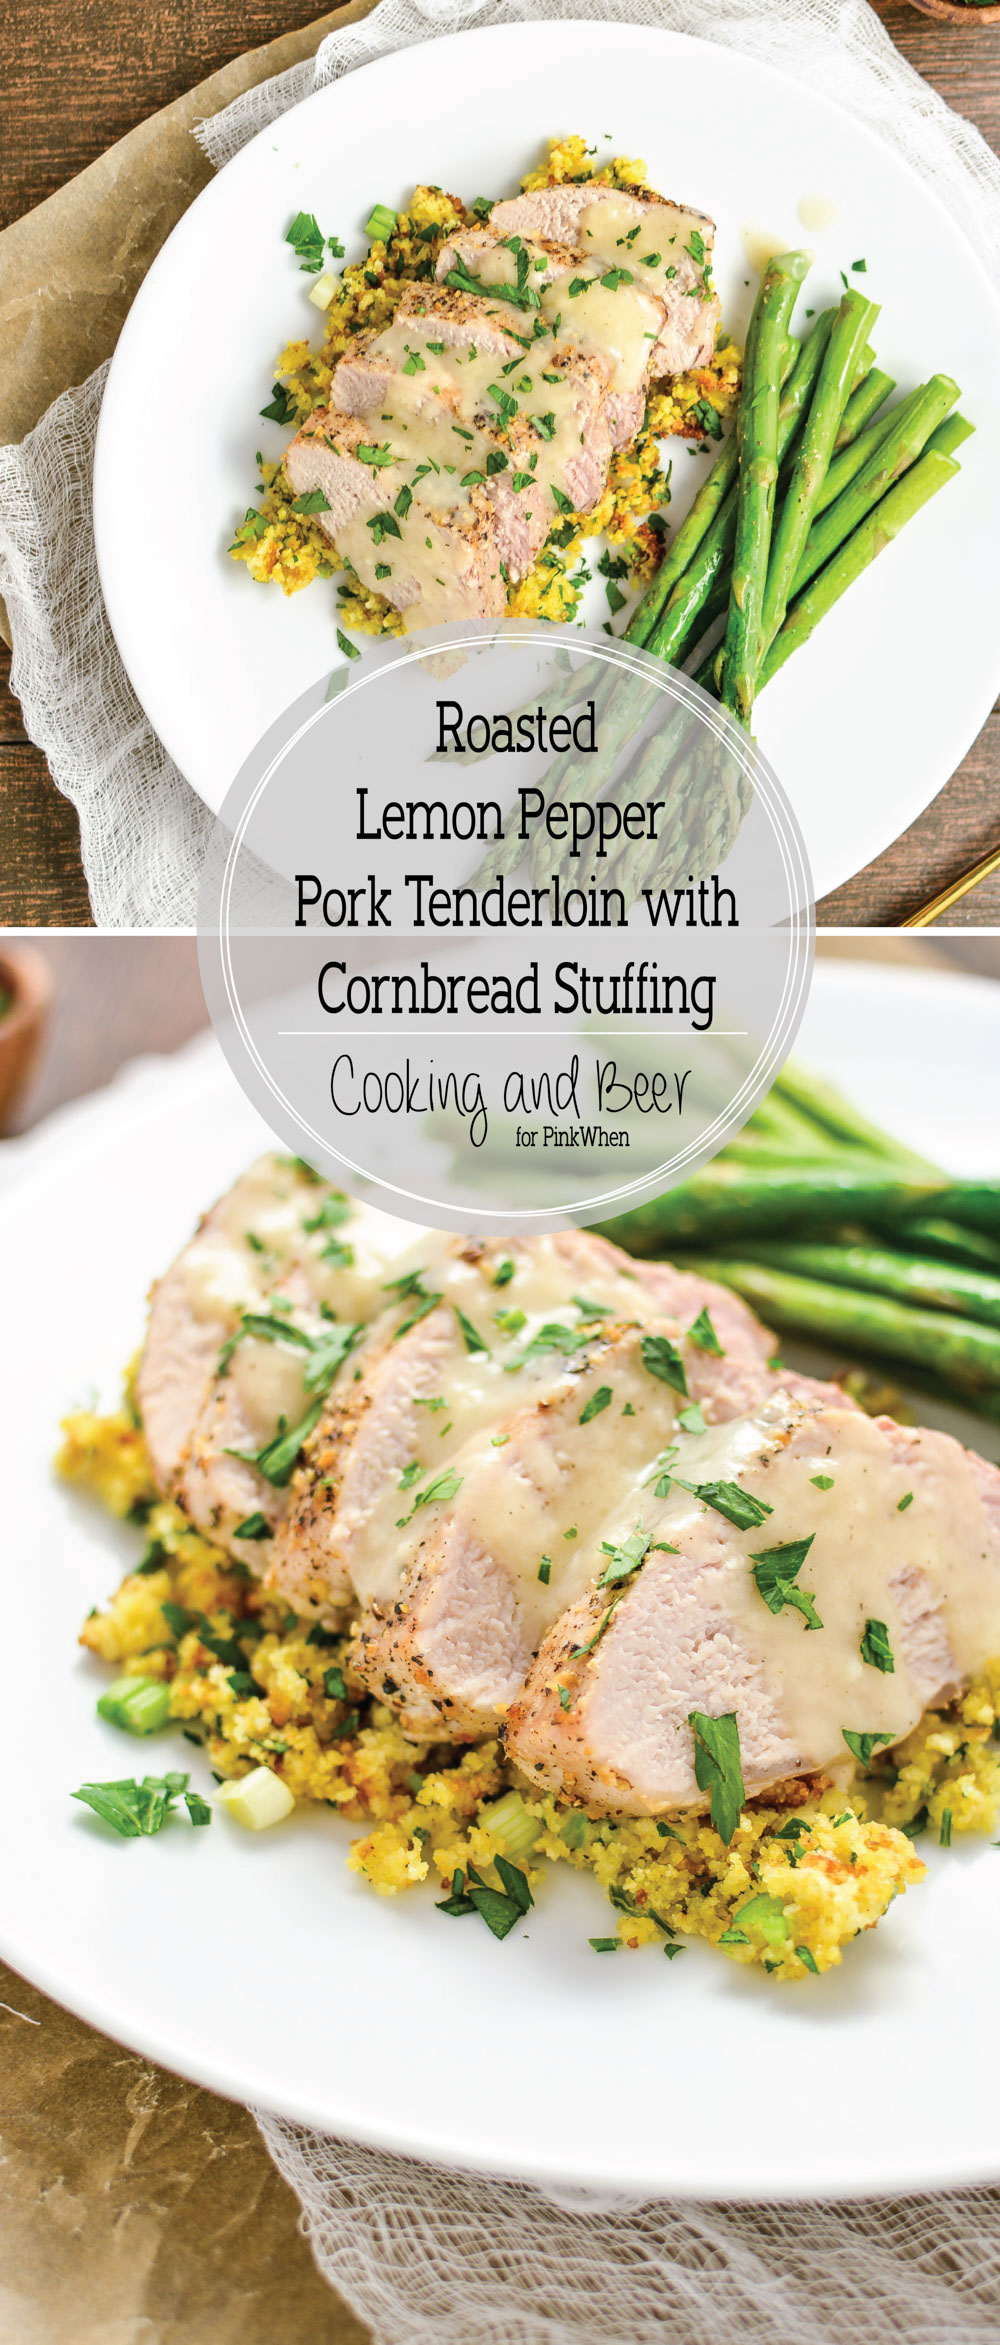 Roasted Lemon Pepper Pork Tenderloin with Cornbread Stuffing is the perfect weeknight dinner recipe that's packed with flavor!